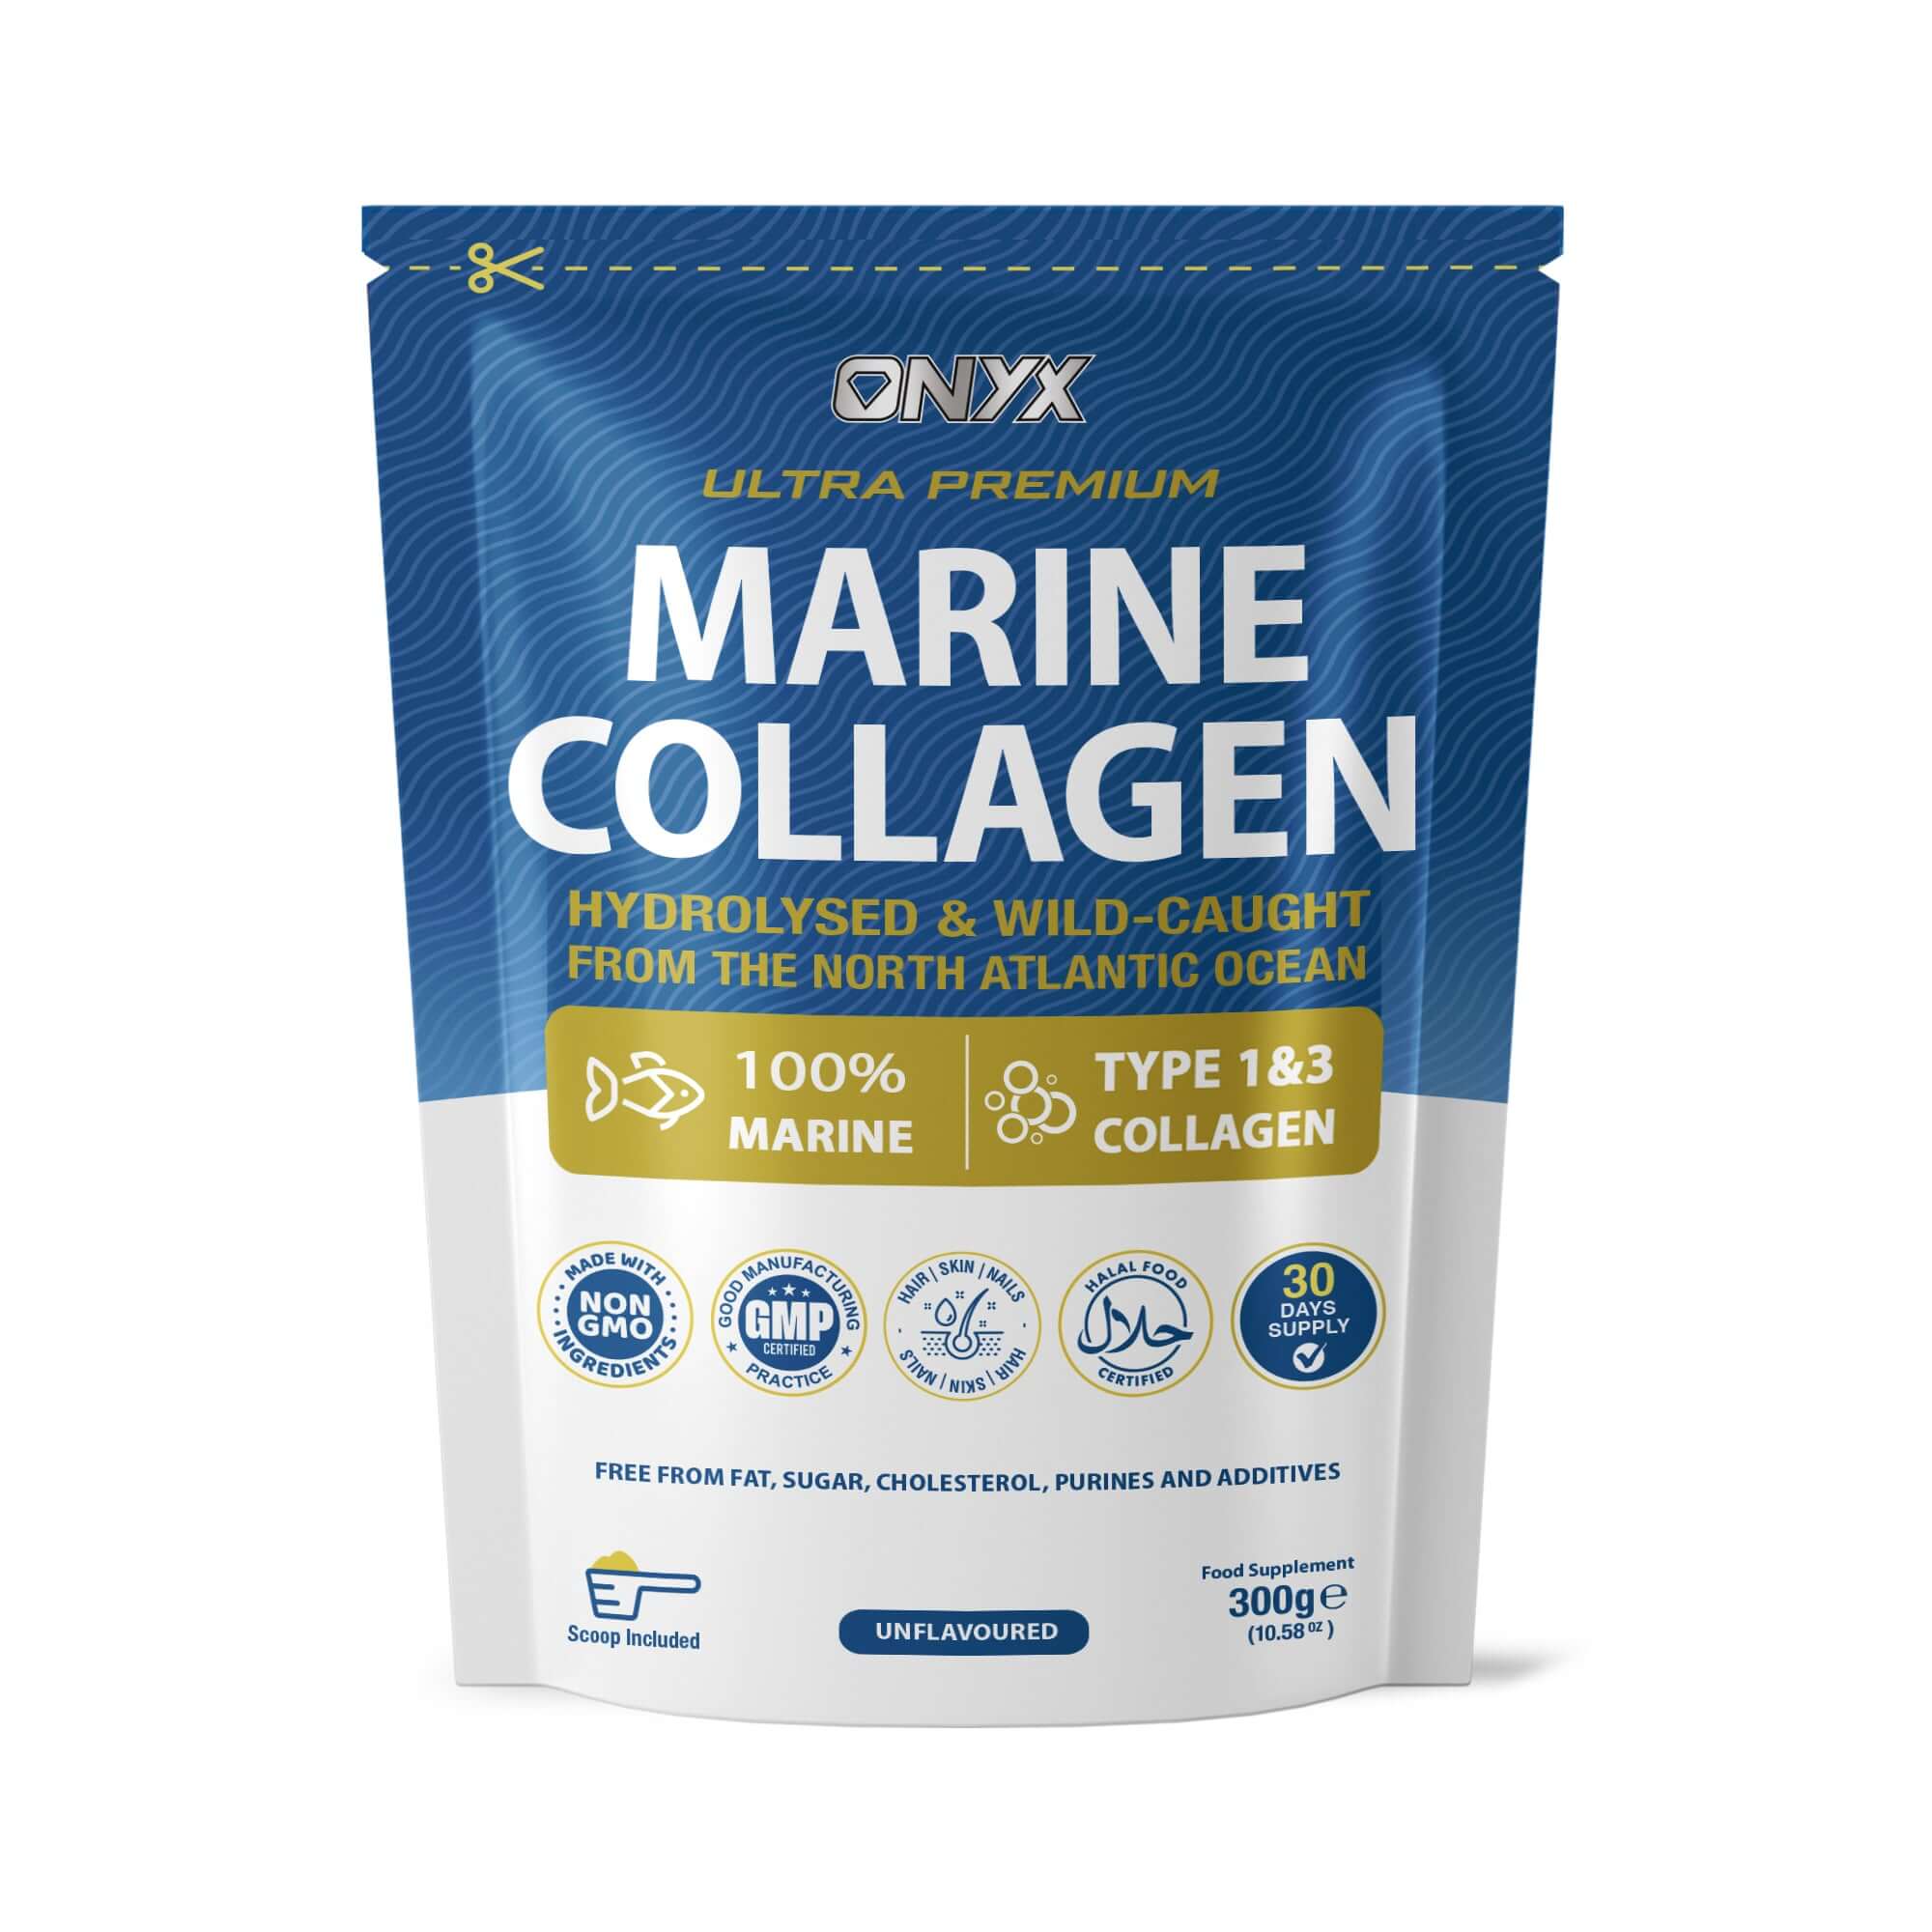 Onyx Marine Collagen Powder 300g - Hydrolysed, Wild-Caught, Type 1 & 3 for Skin and Joint Health